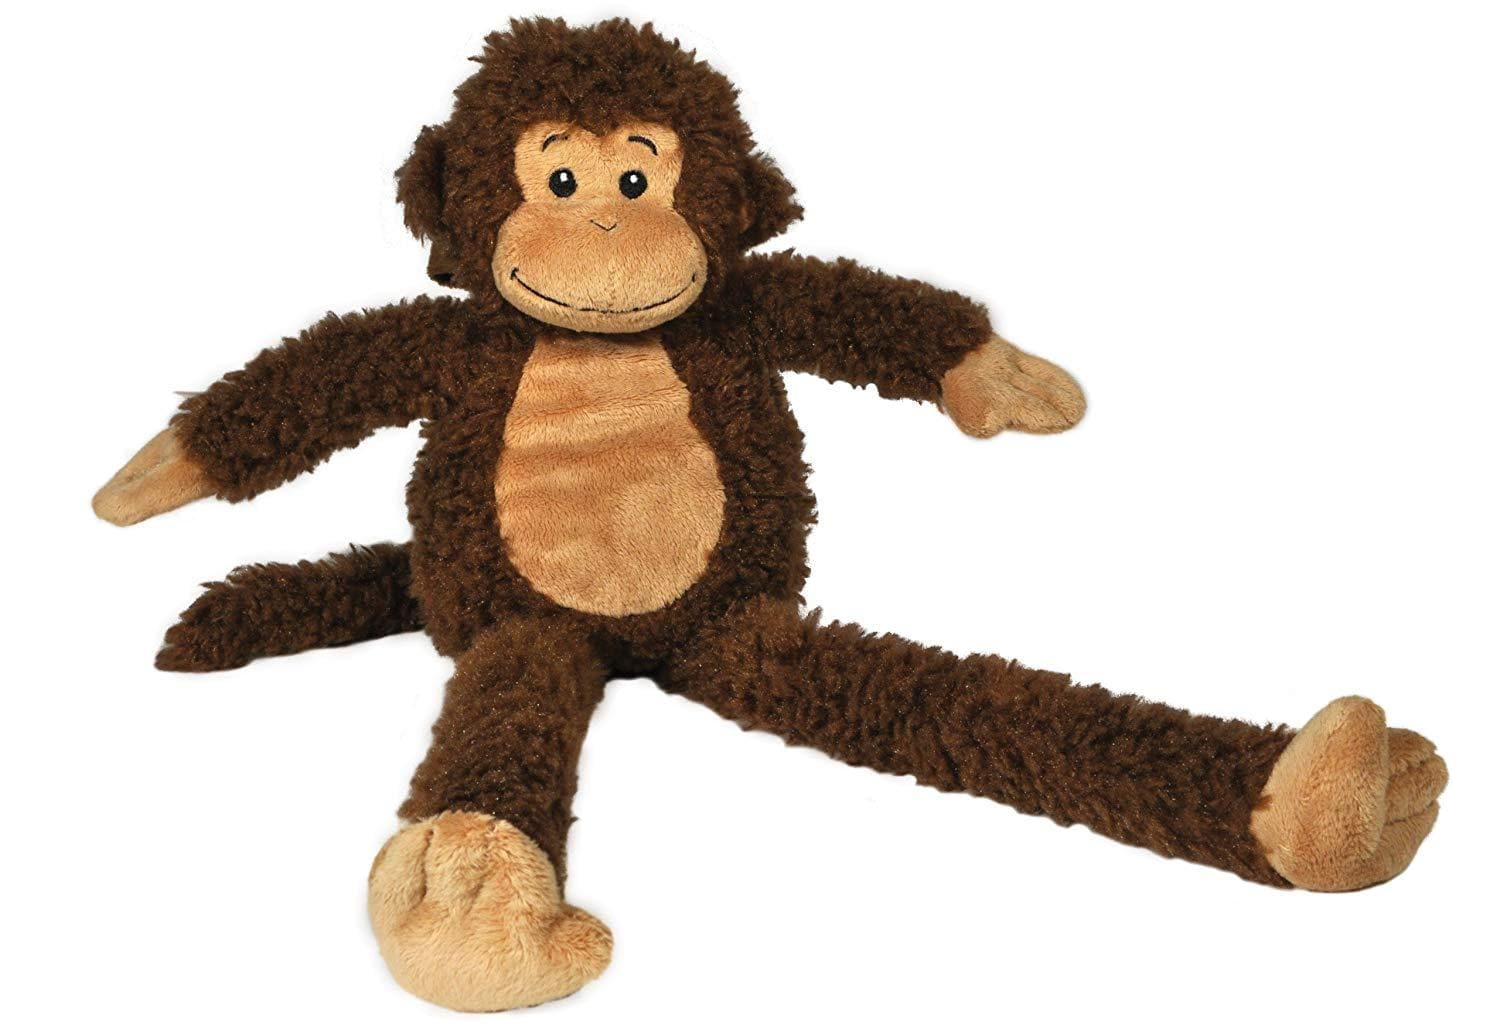 CLOUD B Plush Toy Marvin The Monkey - ANB Baby -$20 - $50